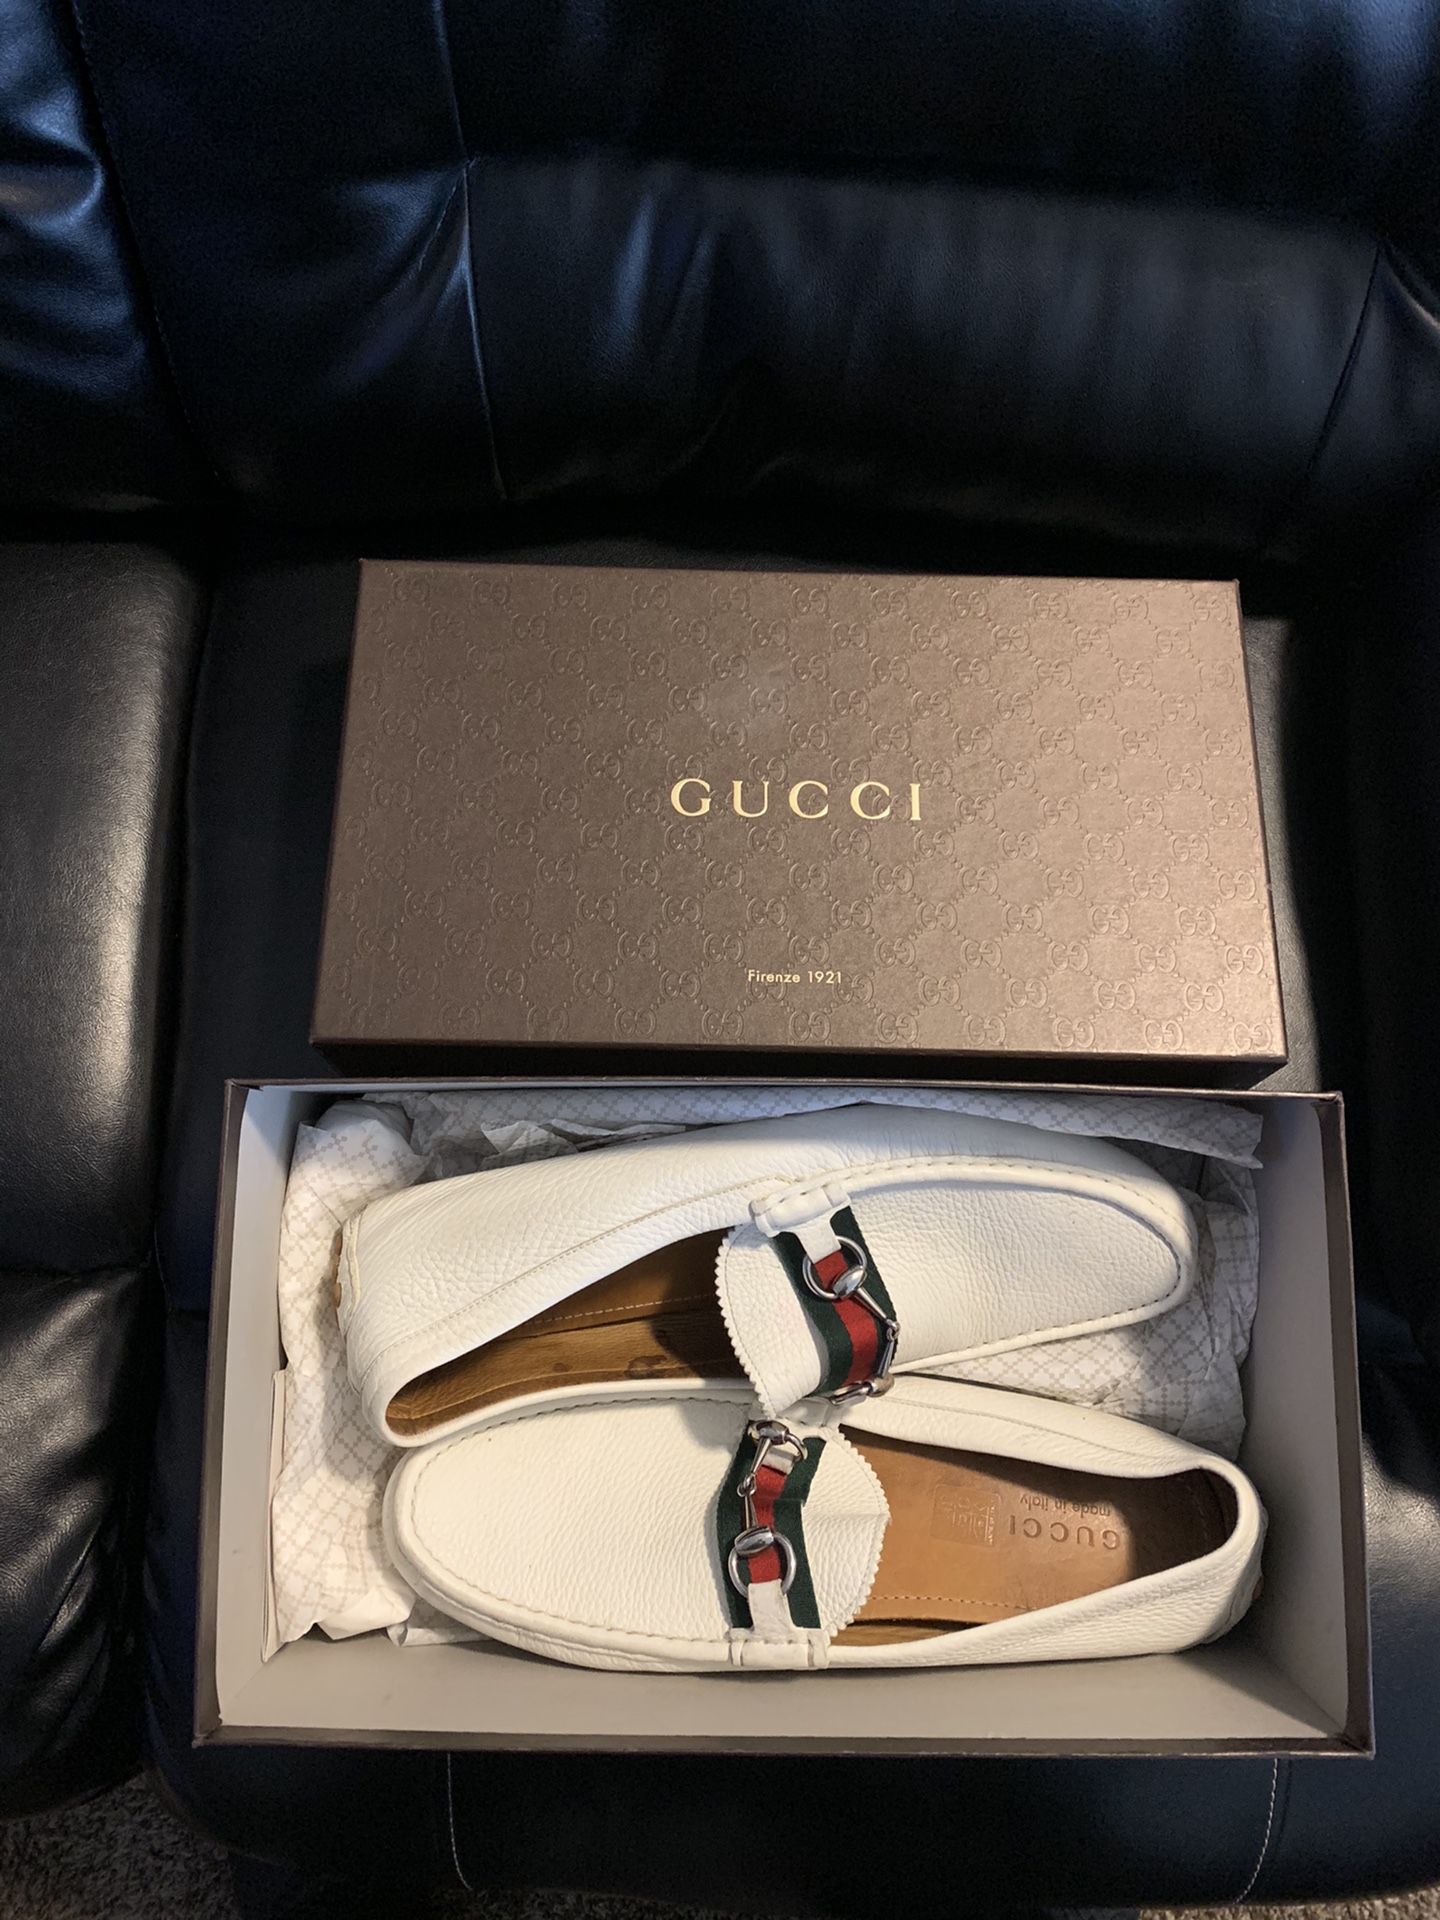 Gucci Loafers for sale Sz 13